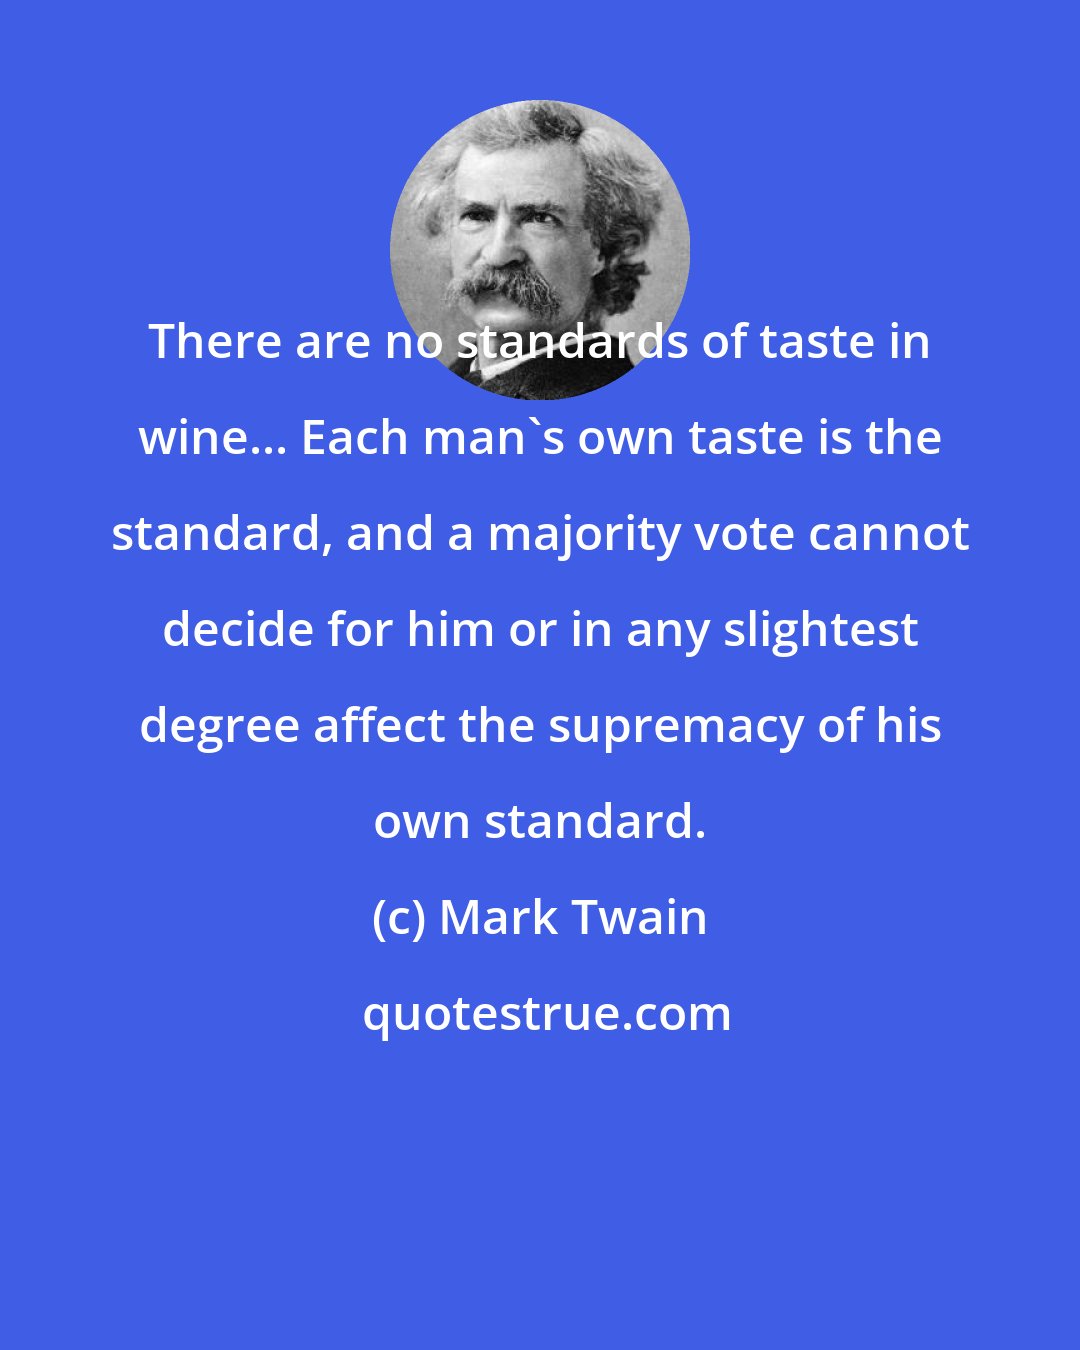 Mark Twain: There are no standards of taste in wine... Each man's own taste is the standard, and a majority vote cannot decide for him or in any slightest degree affect the supremacy of his own standard.